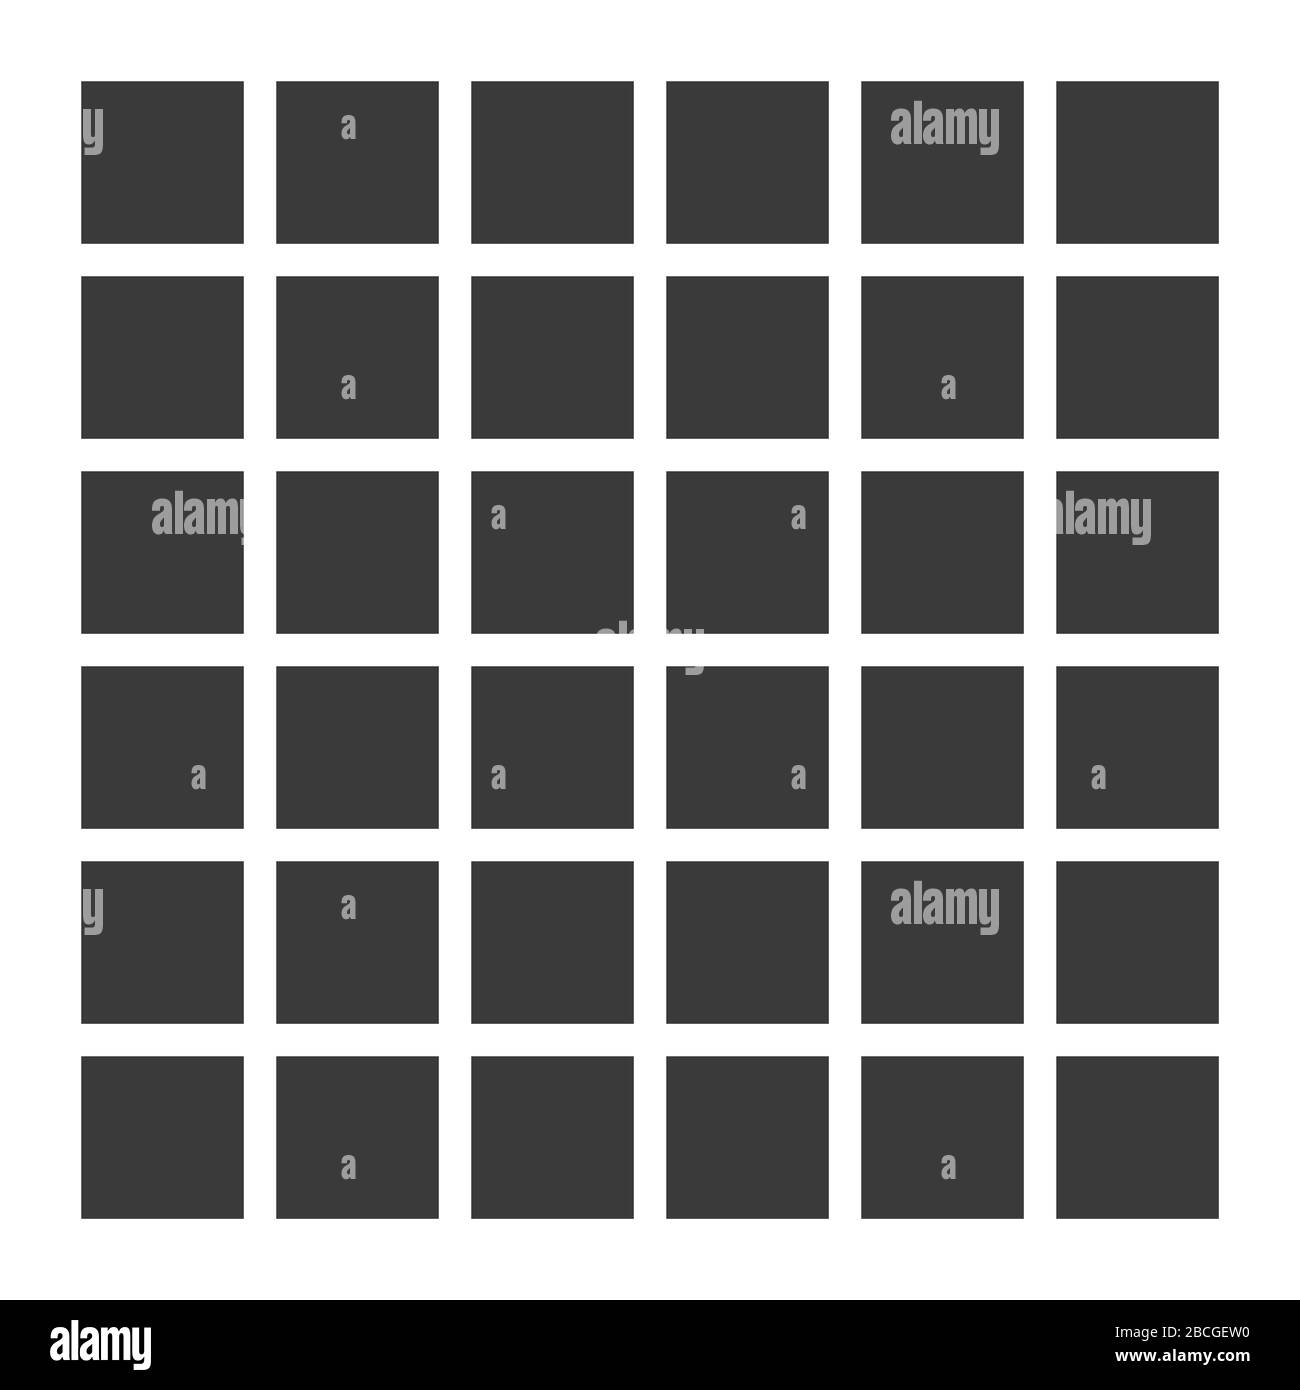 Hermann grid illusion. "Ghostlike" grey blobs perceived at the intersections of a white (or light-colored) grid on a black background. Stock Photo